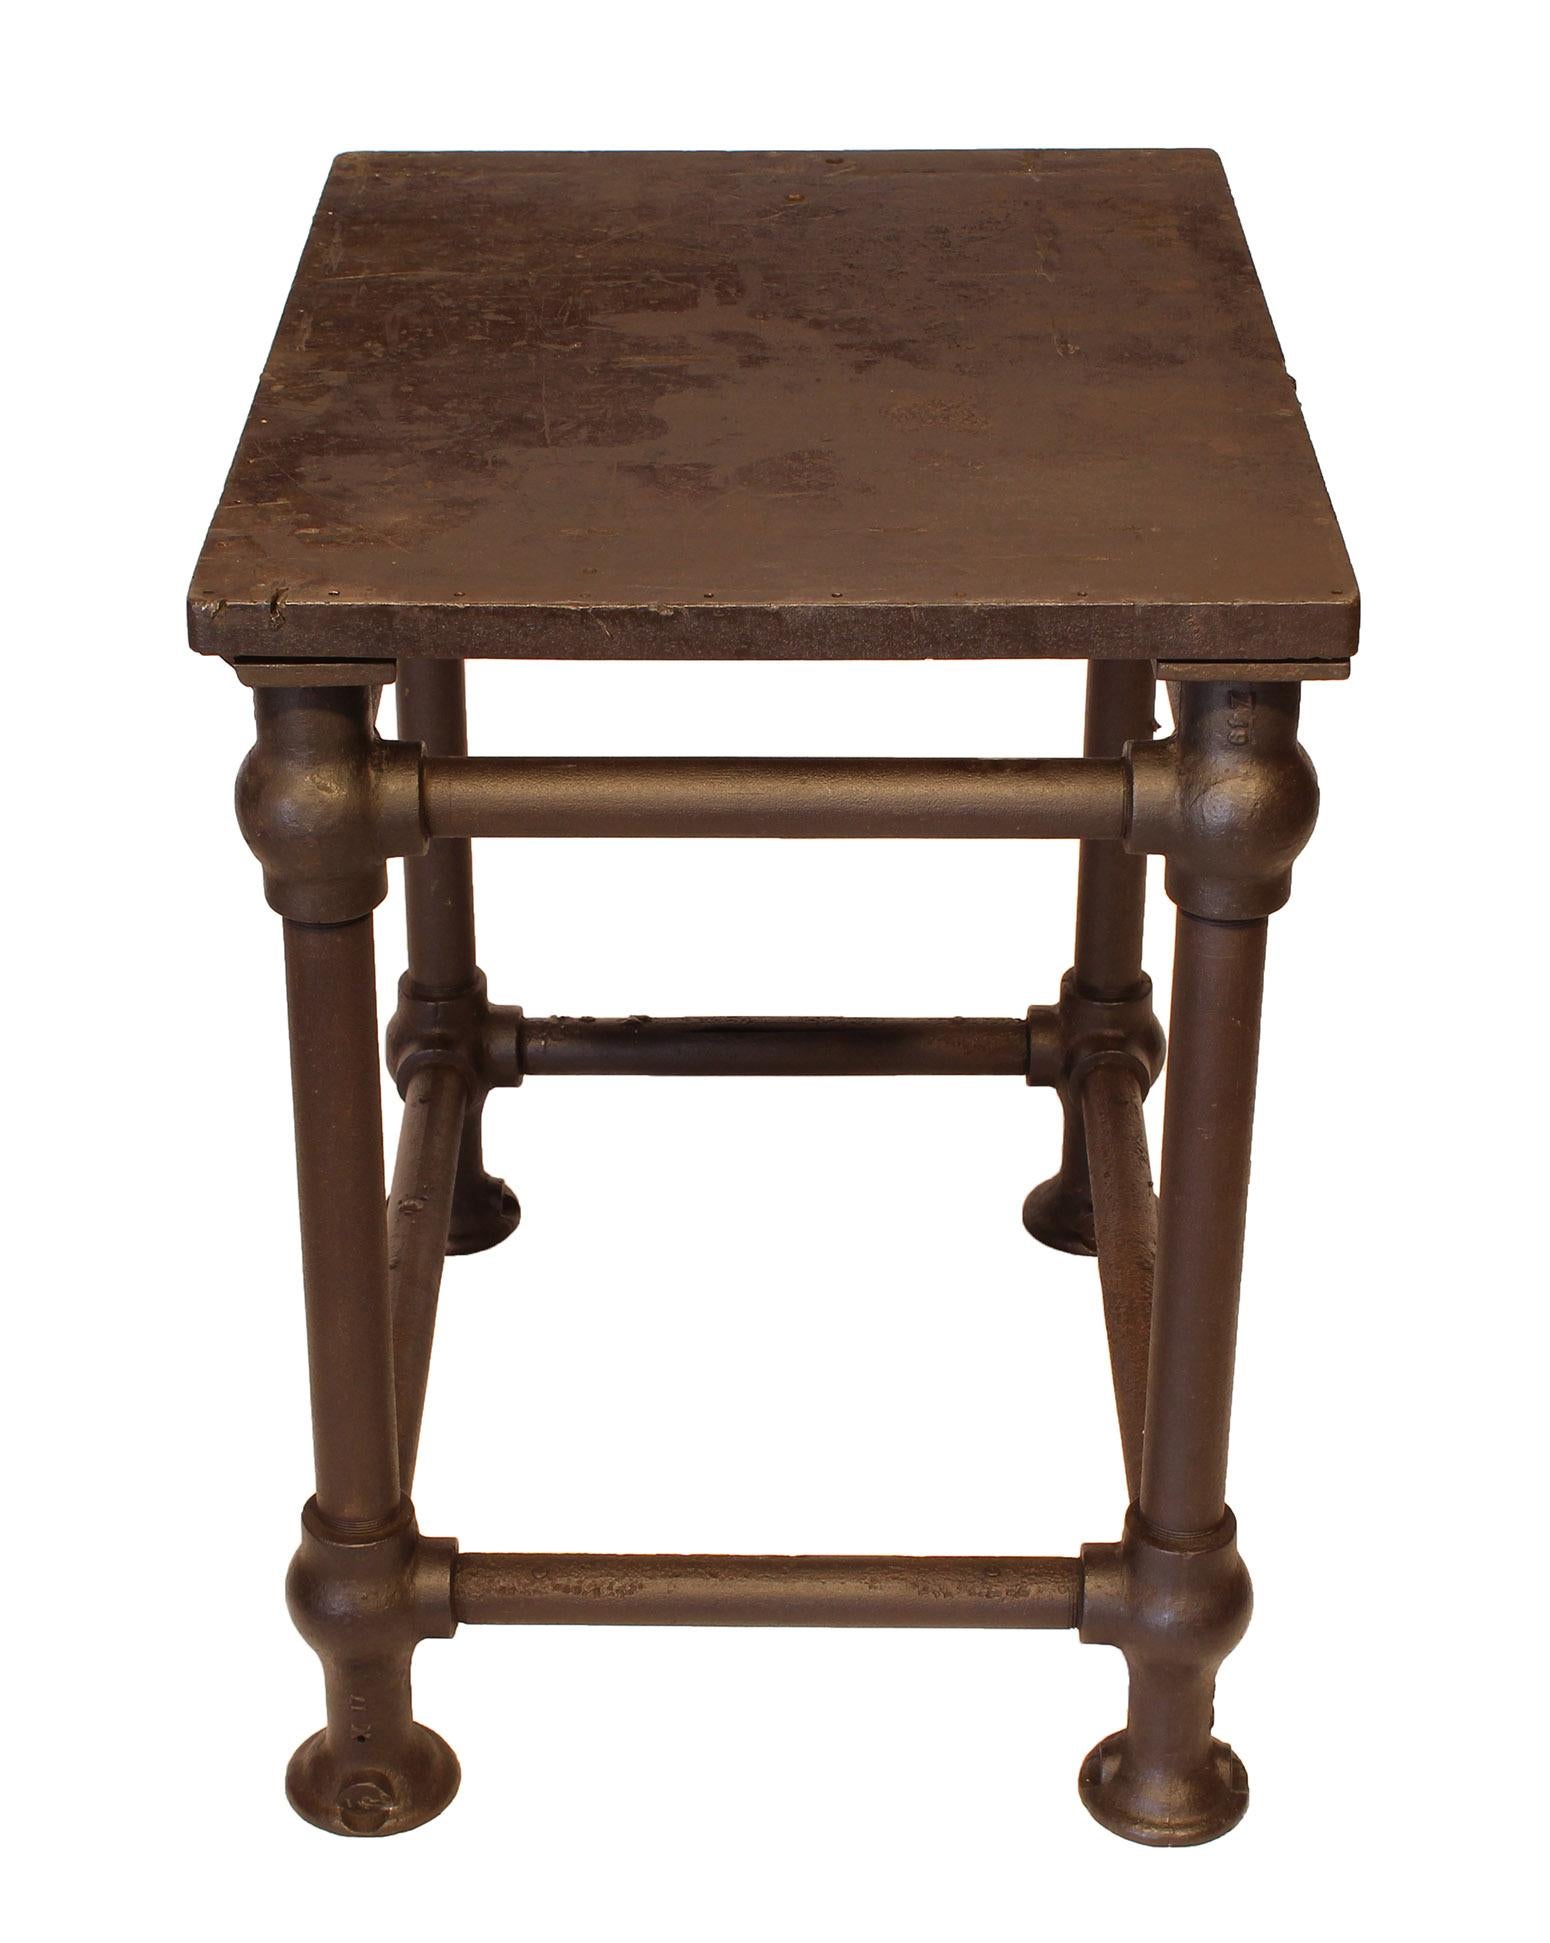 19th Century American Made Cast Iron & Steel Industrial Stationary Printers Letterpress Table